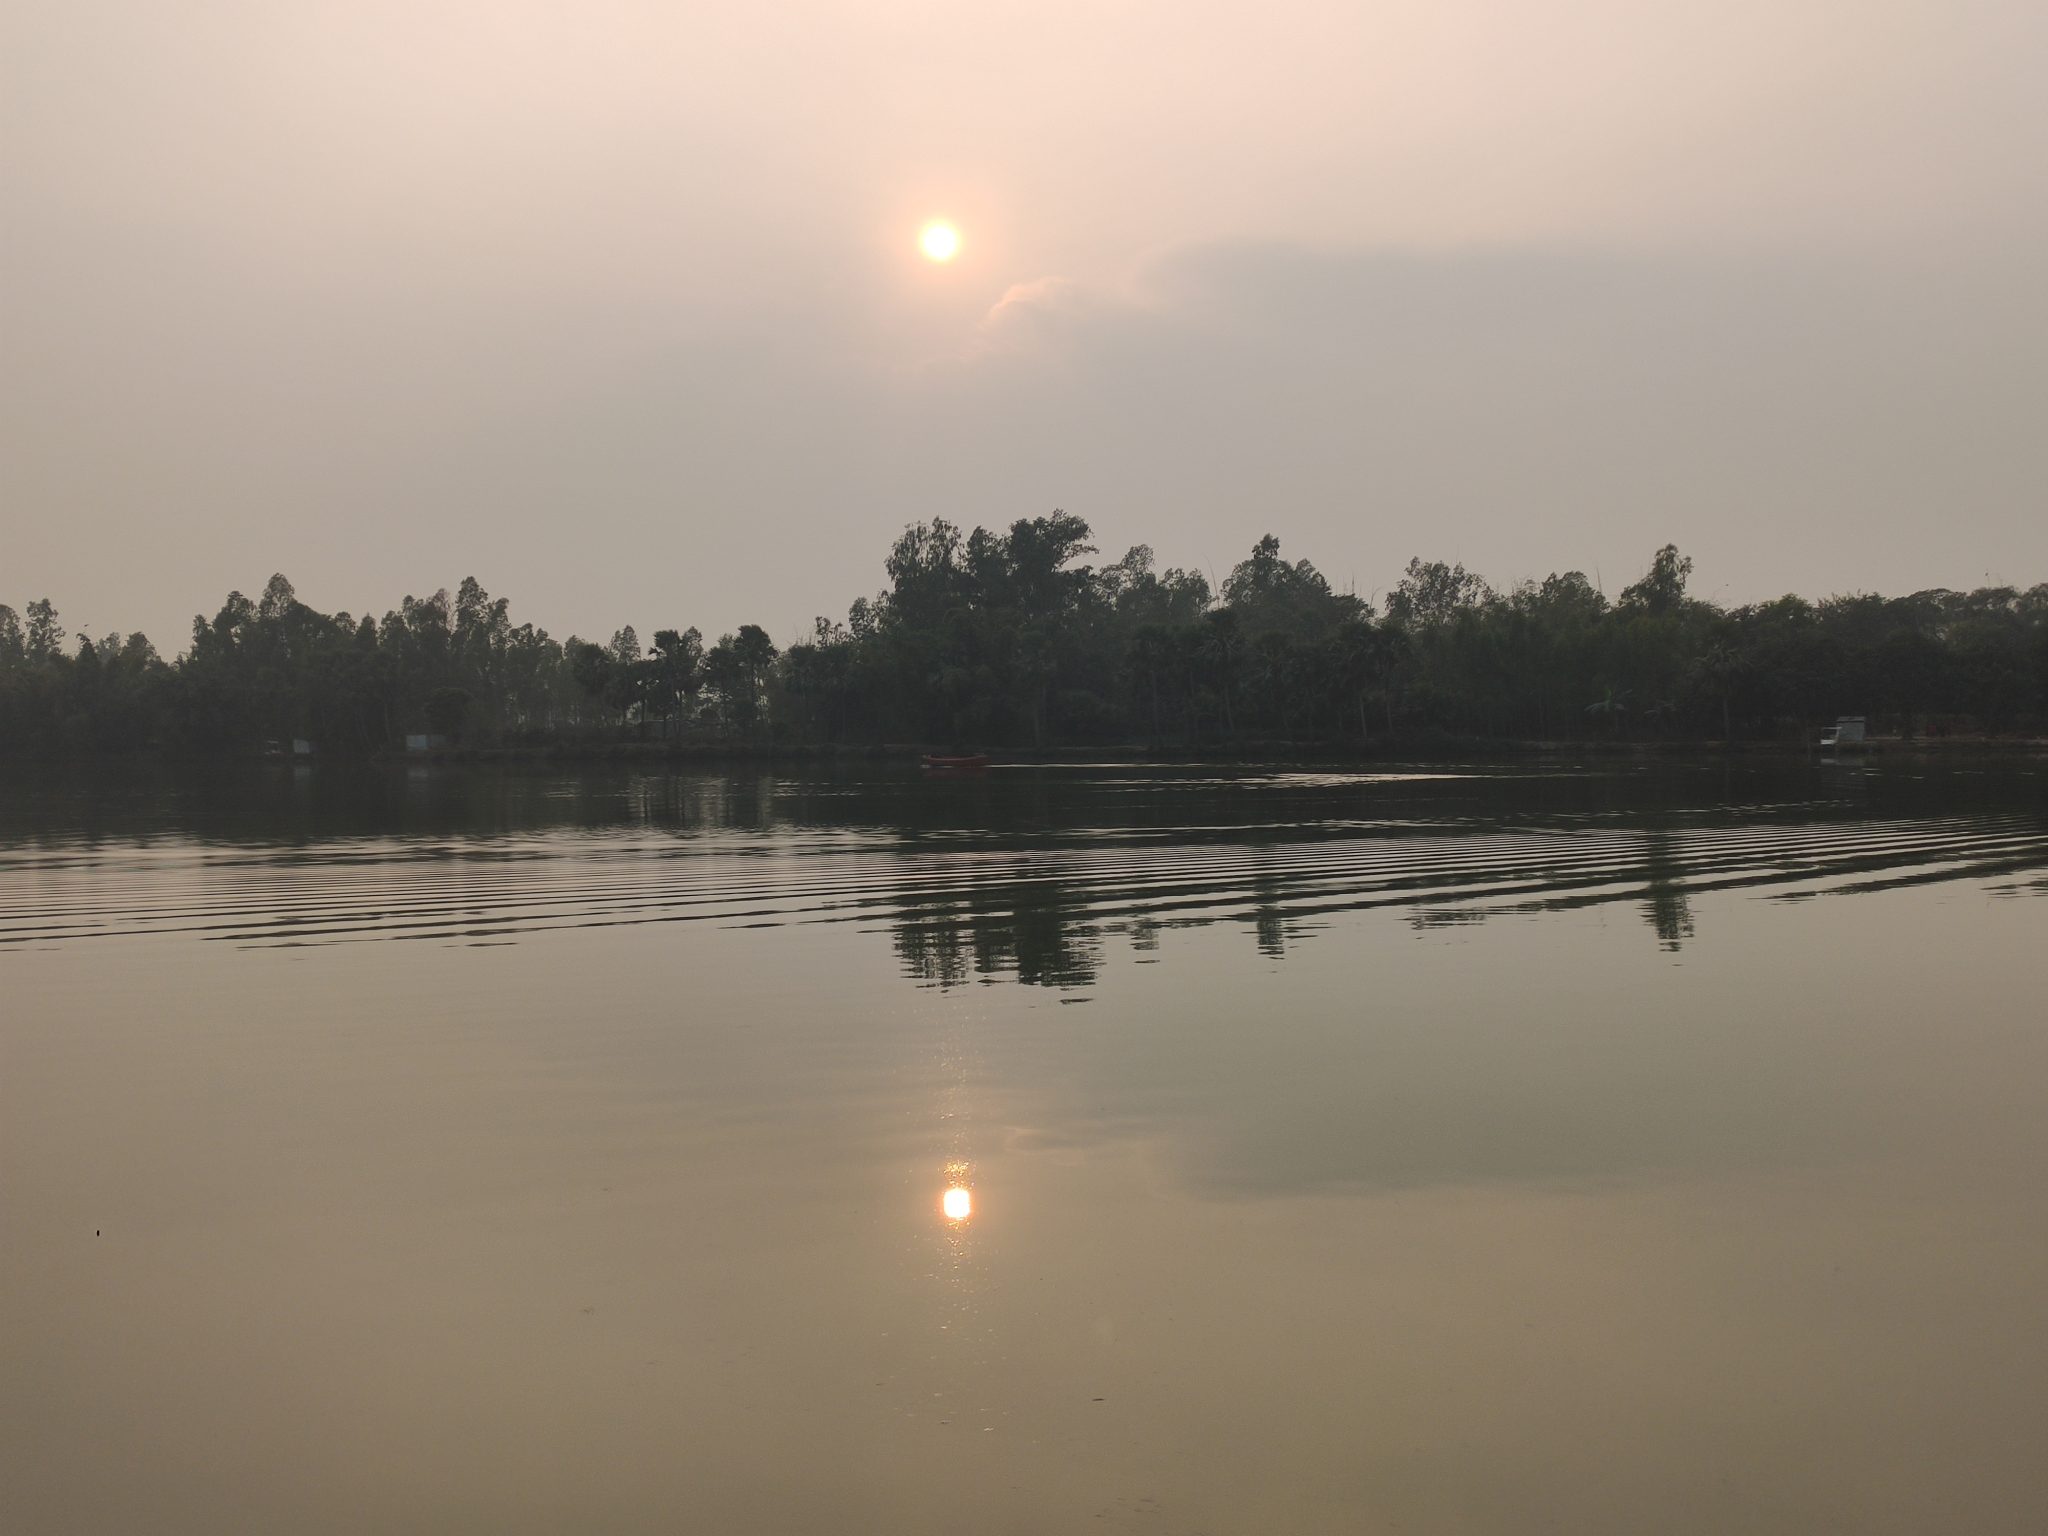 A calm lake or river in the foreground, with forest on the far side.  The sun is just over the horizon but mostly hidden behind clouds so the world is dim.